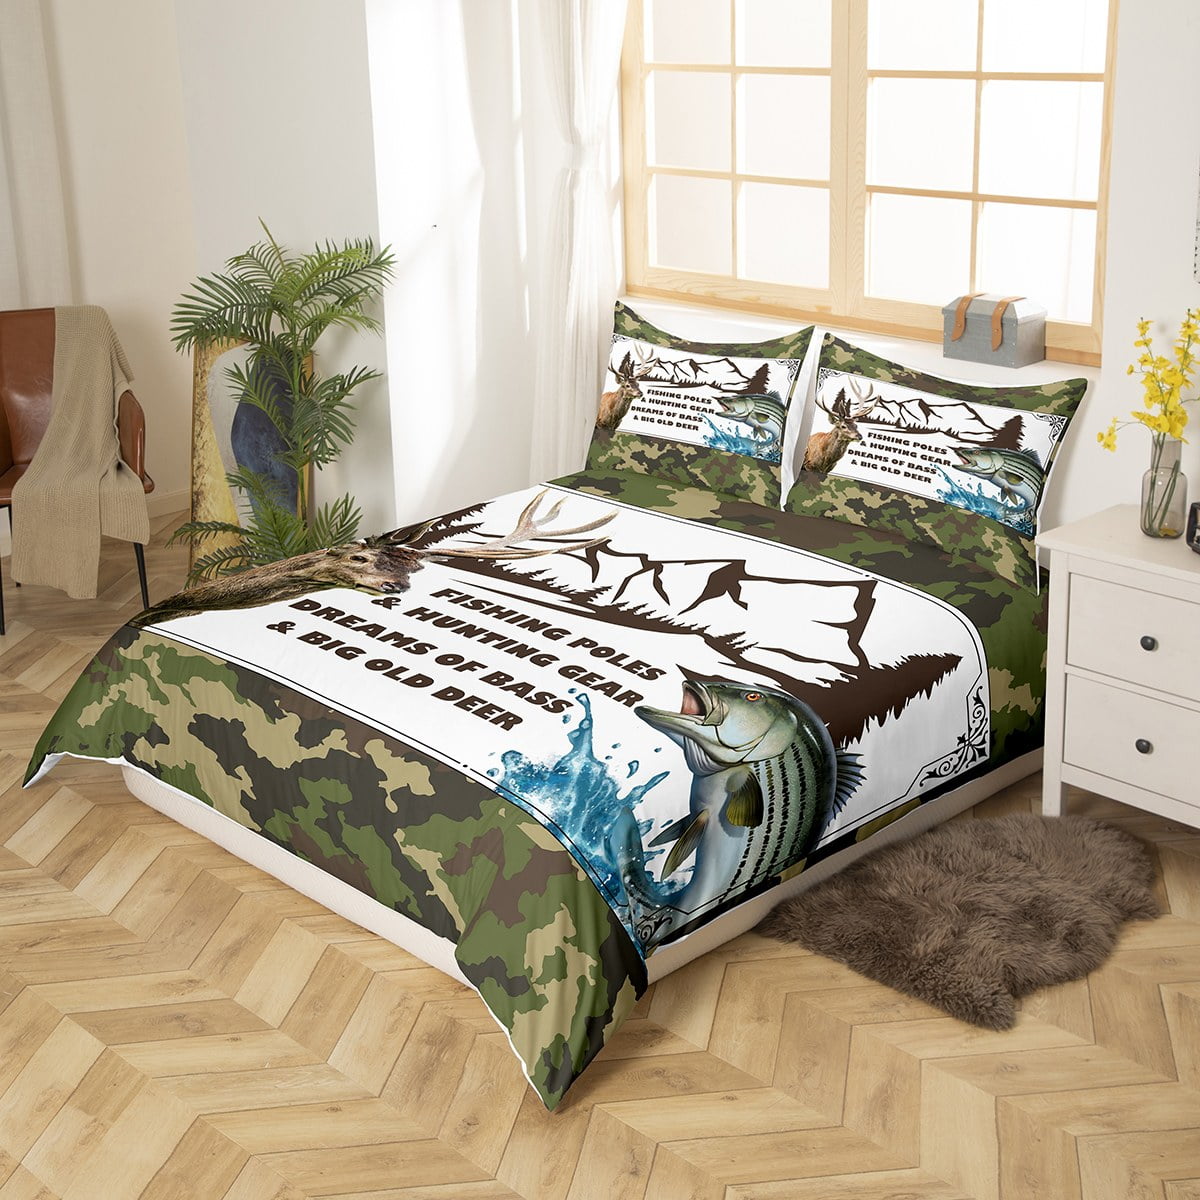 YST Camo Fishing Bedding Set For Boys Full,Army Green Camouflage American  Flag Comforter Cover Big Bass Pike Fish Duvet Cover Fishing Rod Net Quilt  Cover Rustic Farmhouse Room Decor 3 Pcs 